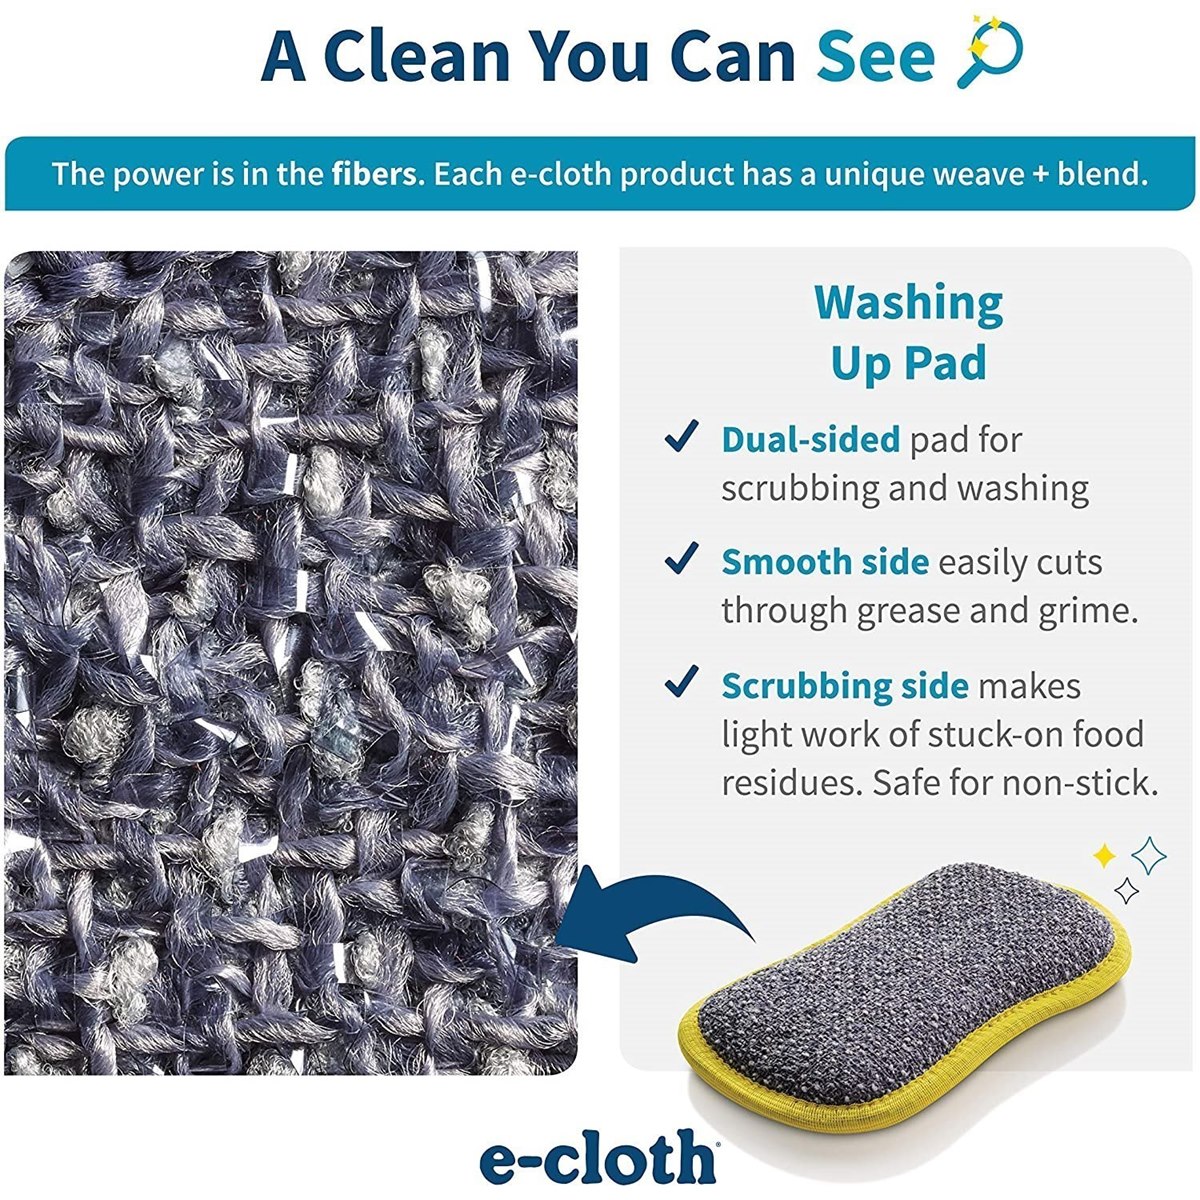 How to use an e-cloth washing up pad